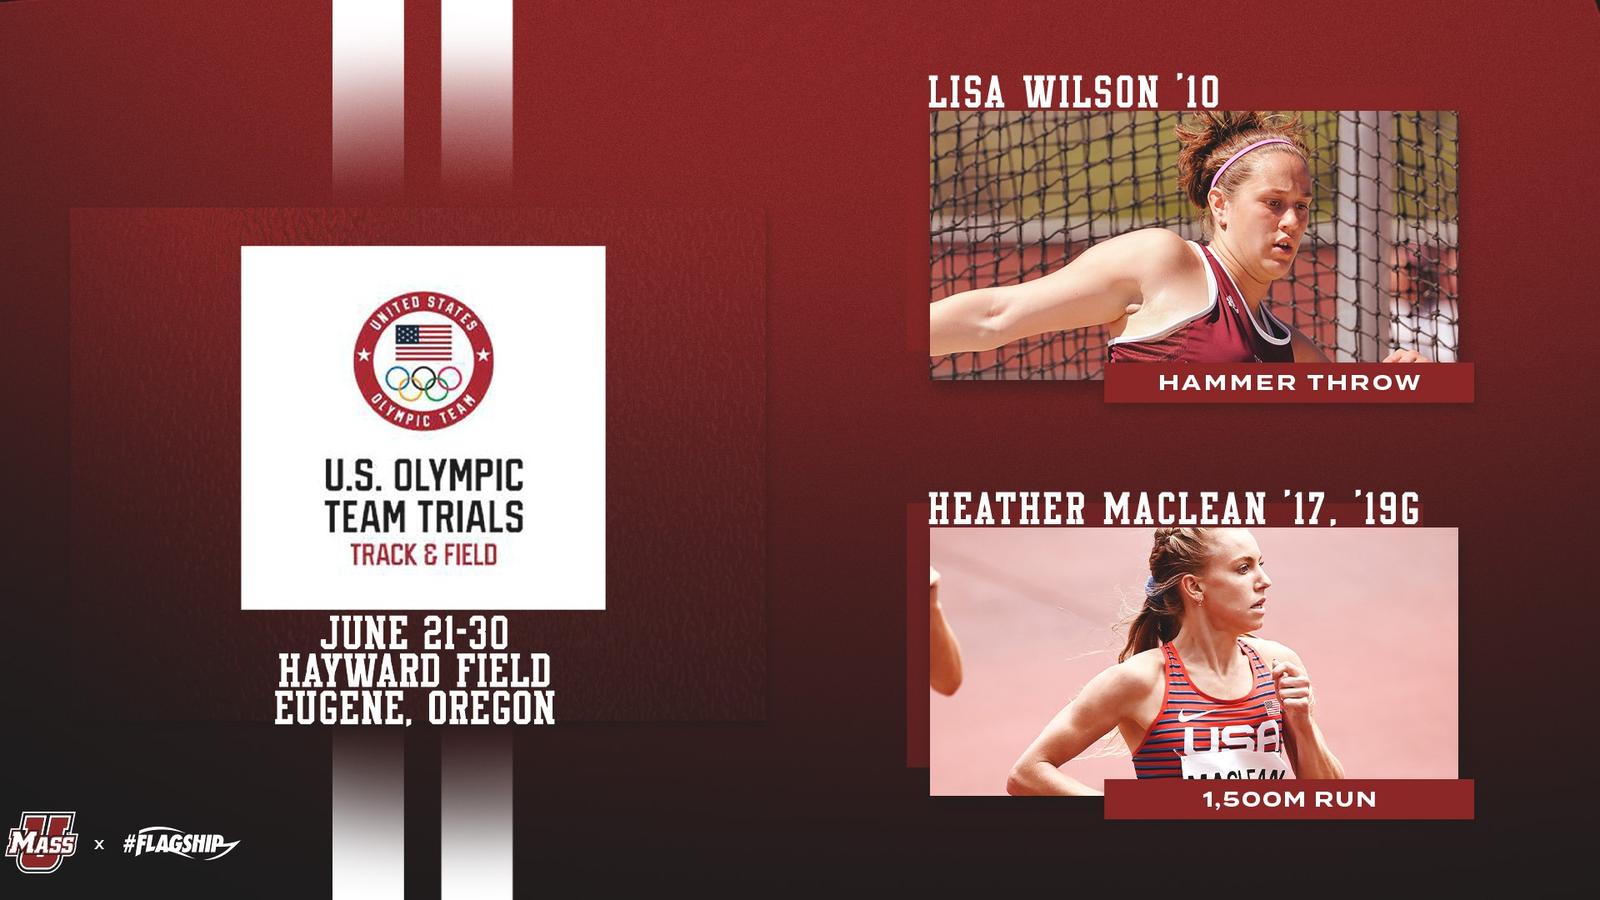 UMass Womens Track & Field Alumnae Ready for Action at U.S. Olympic Team Trials